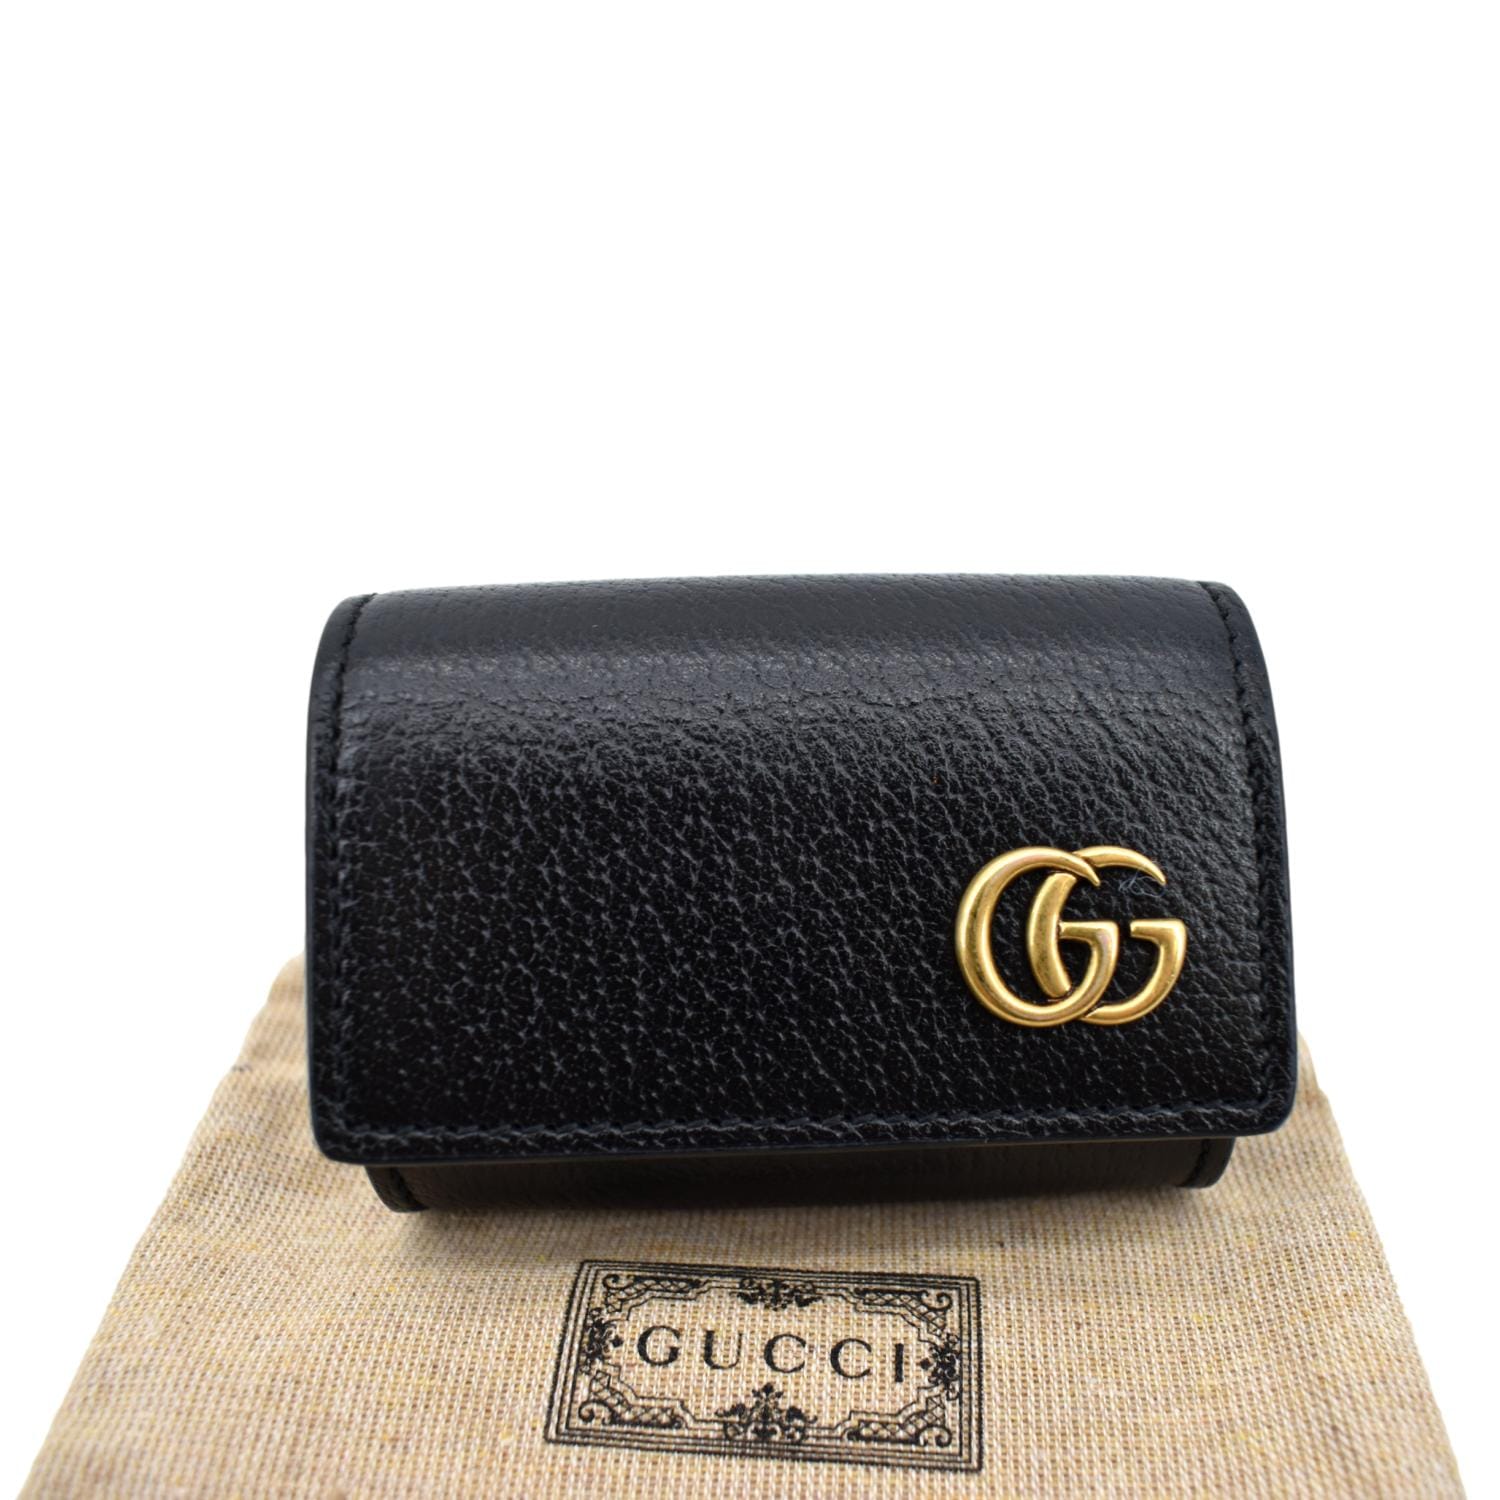 Gucci airpod case, In offer price with free shipping